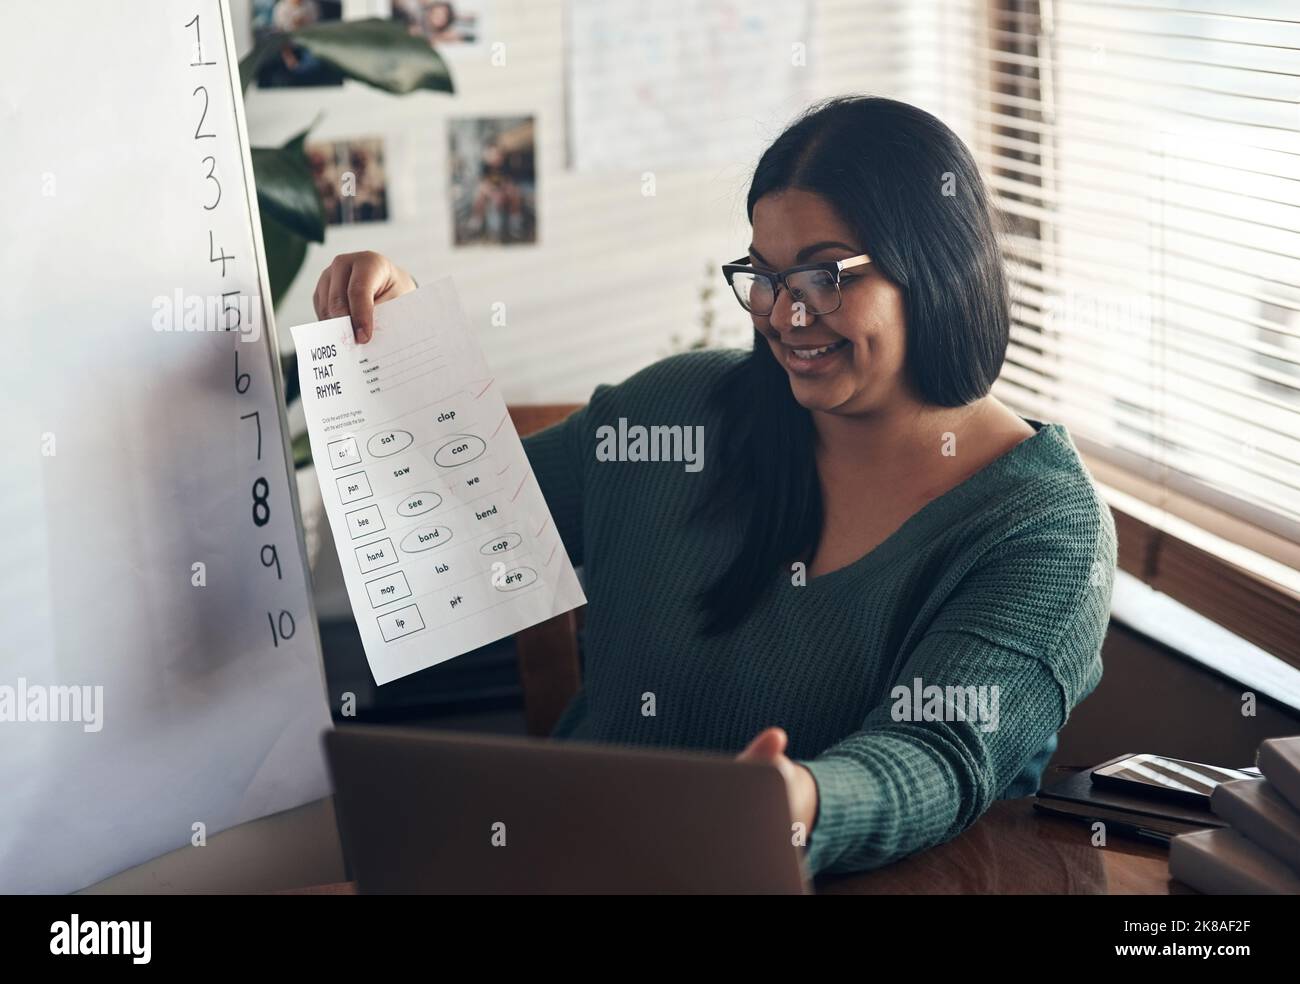 Online learning is still learning. a young woman using a laptop to teach a lesson from home. Stock Photo